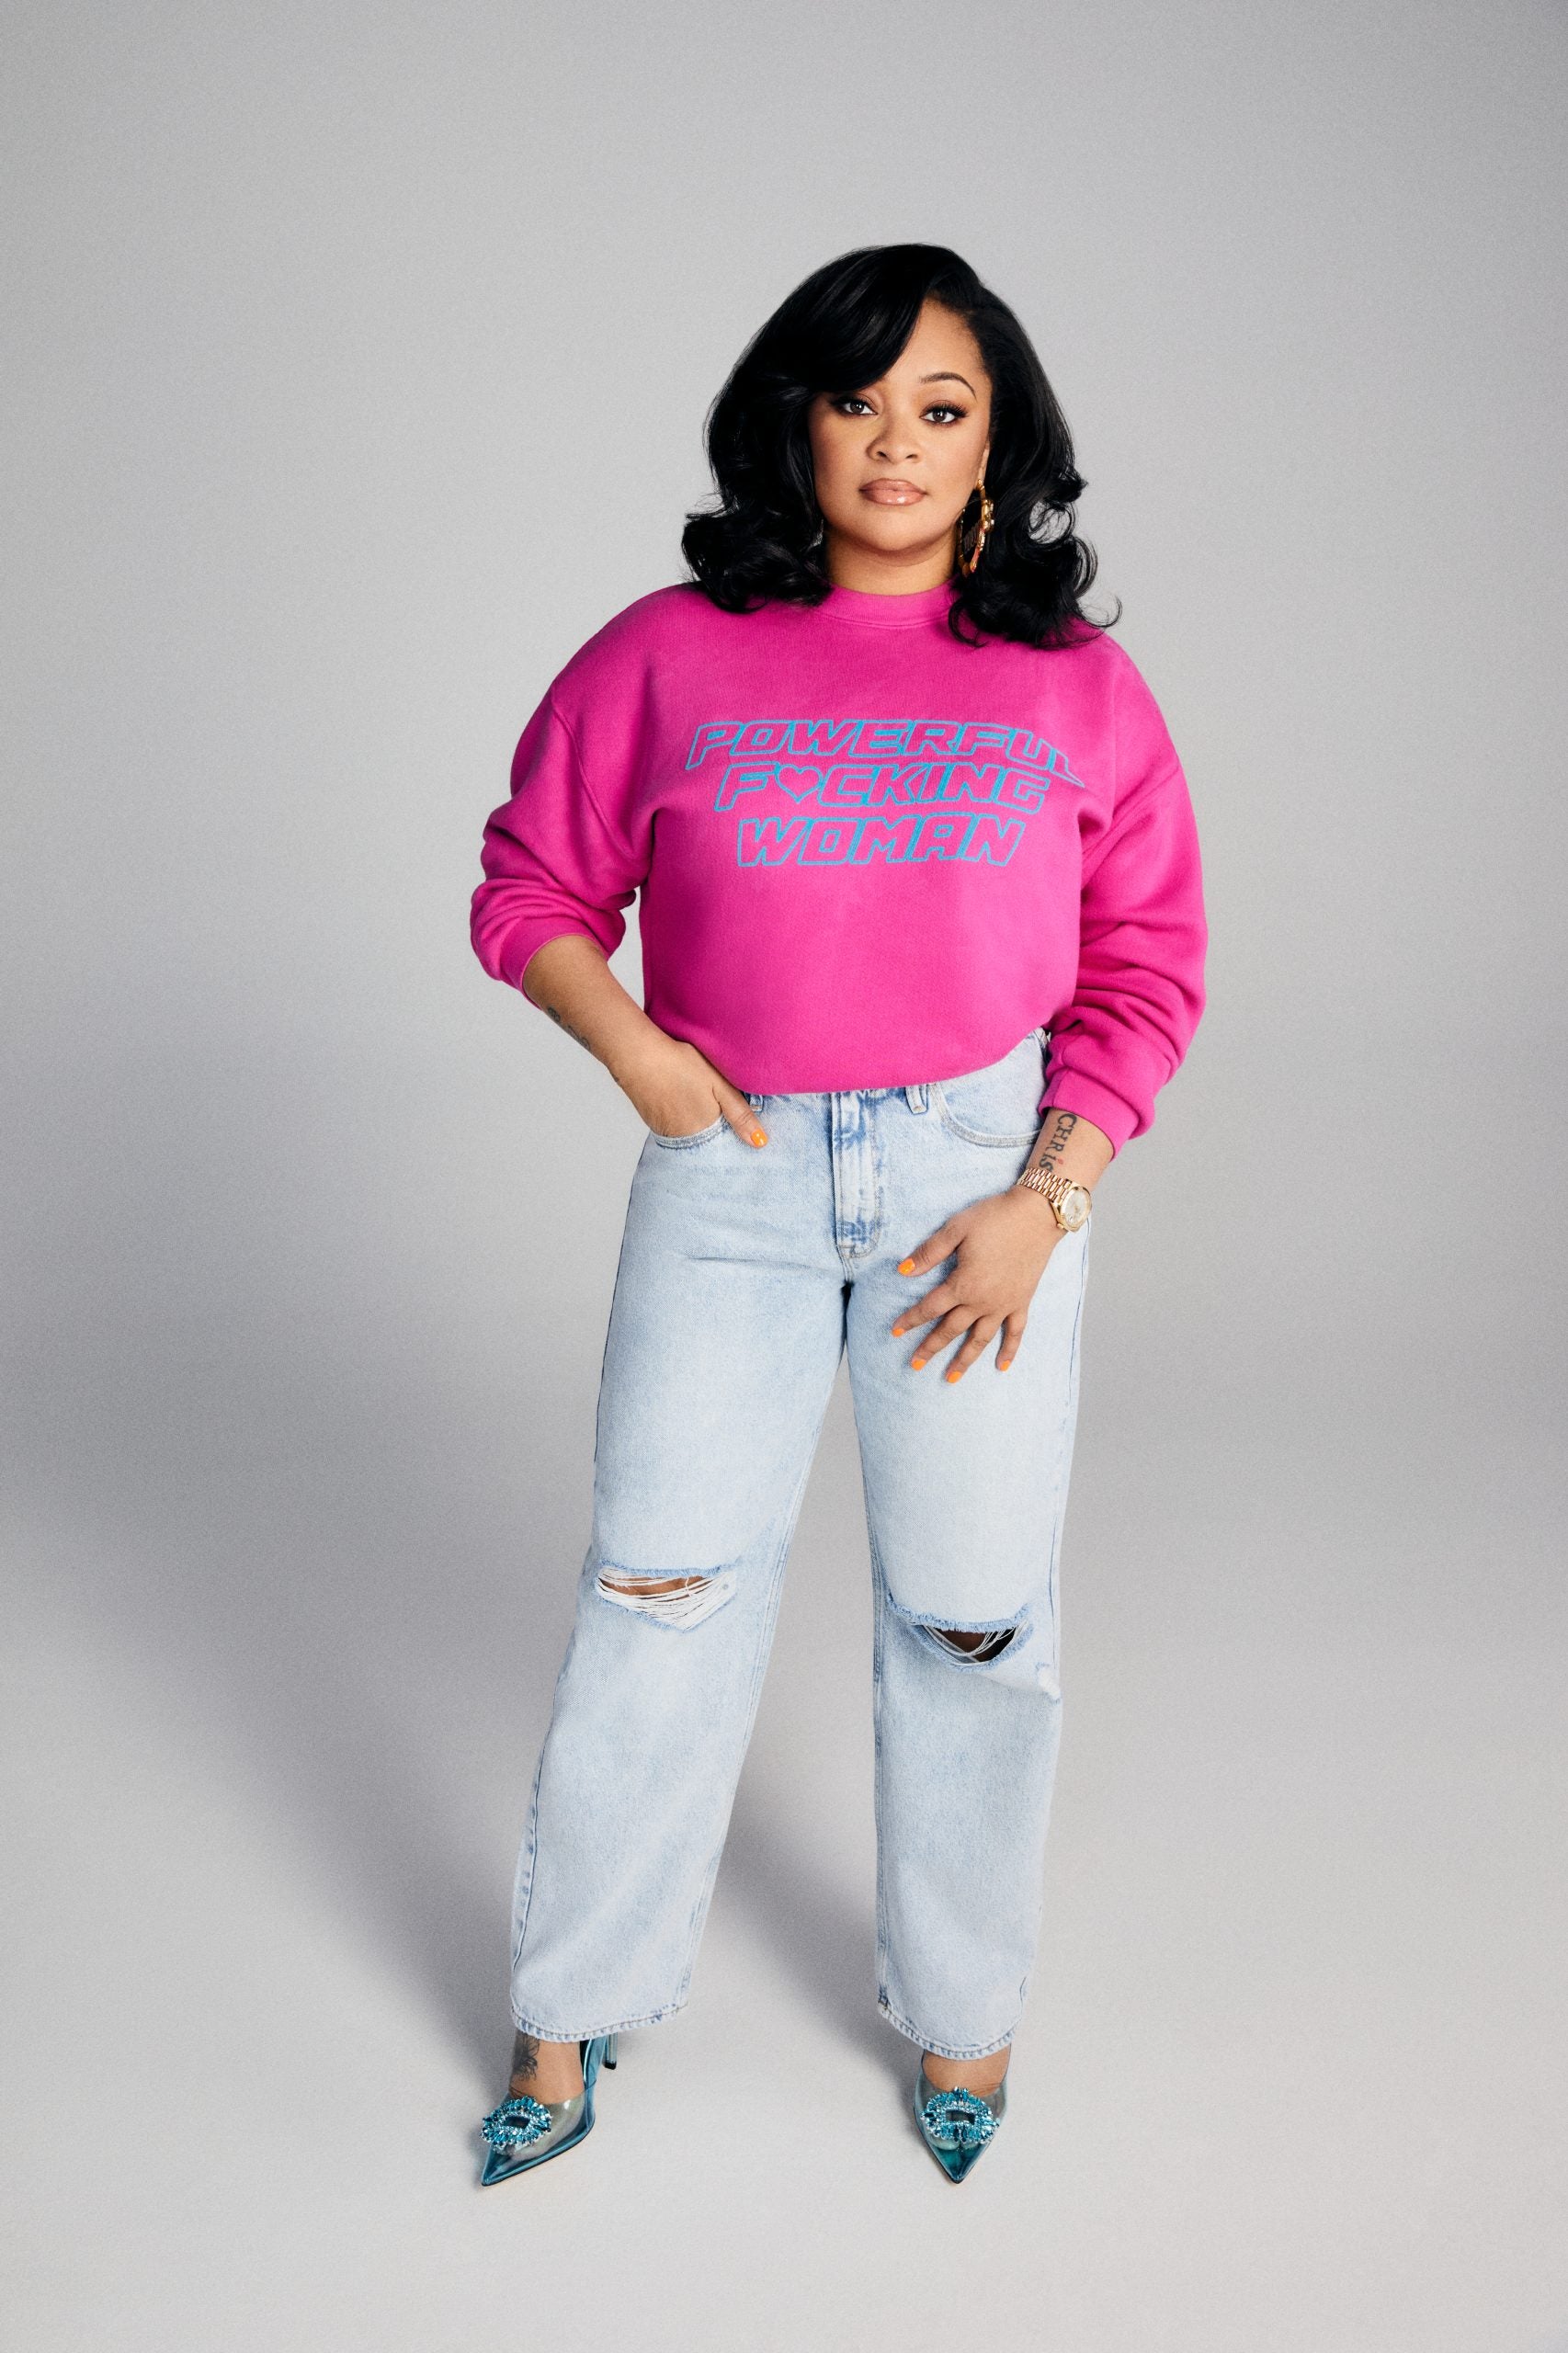 Baroline Diaz Teams Up With Good American For Debut Apparel Collaboration